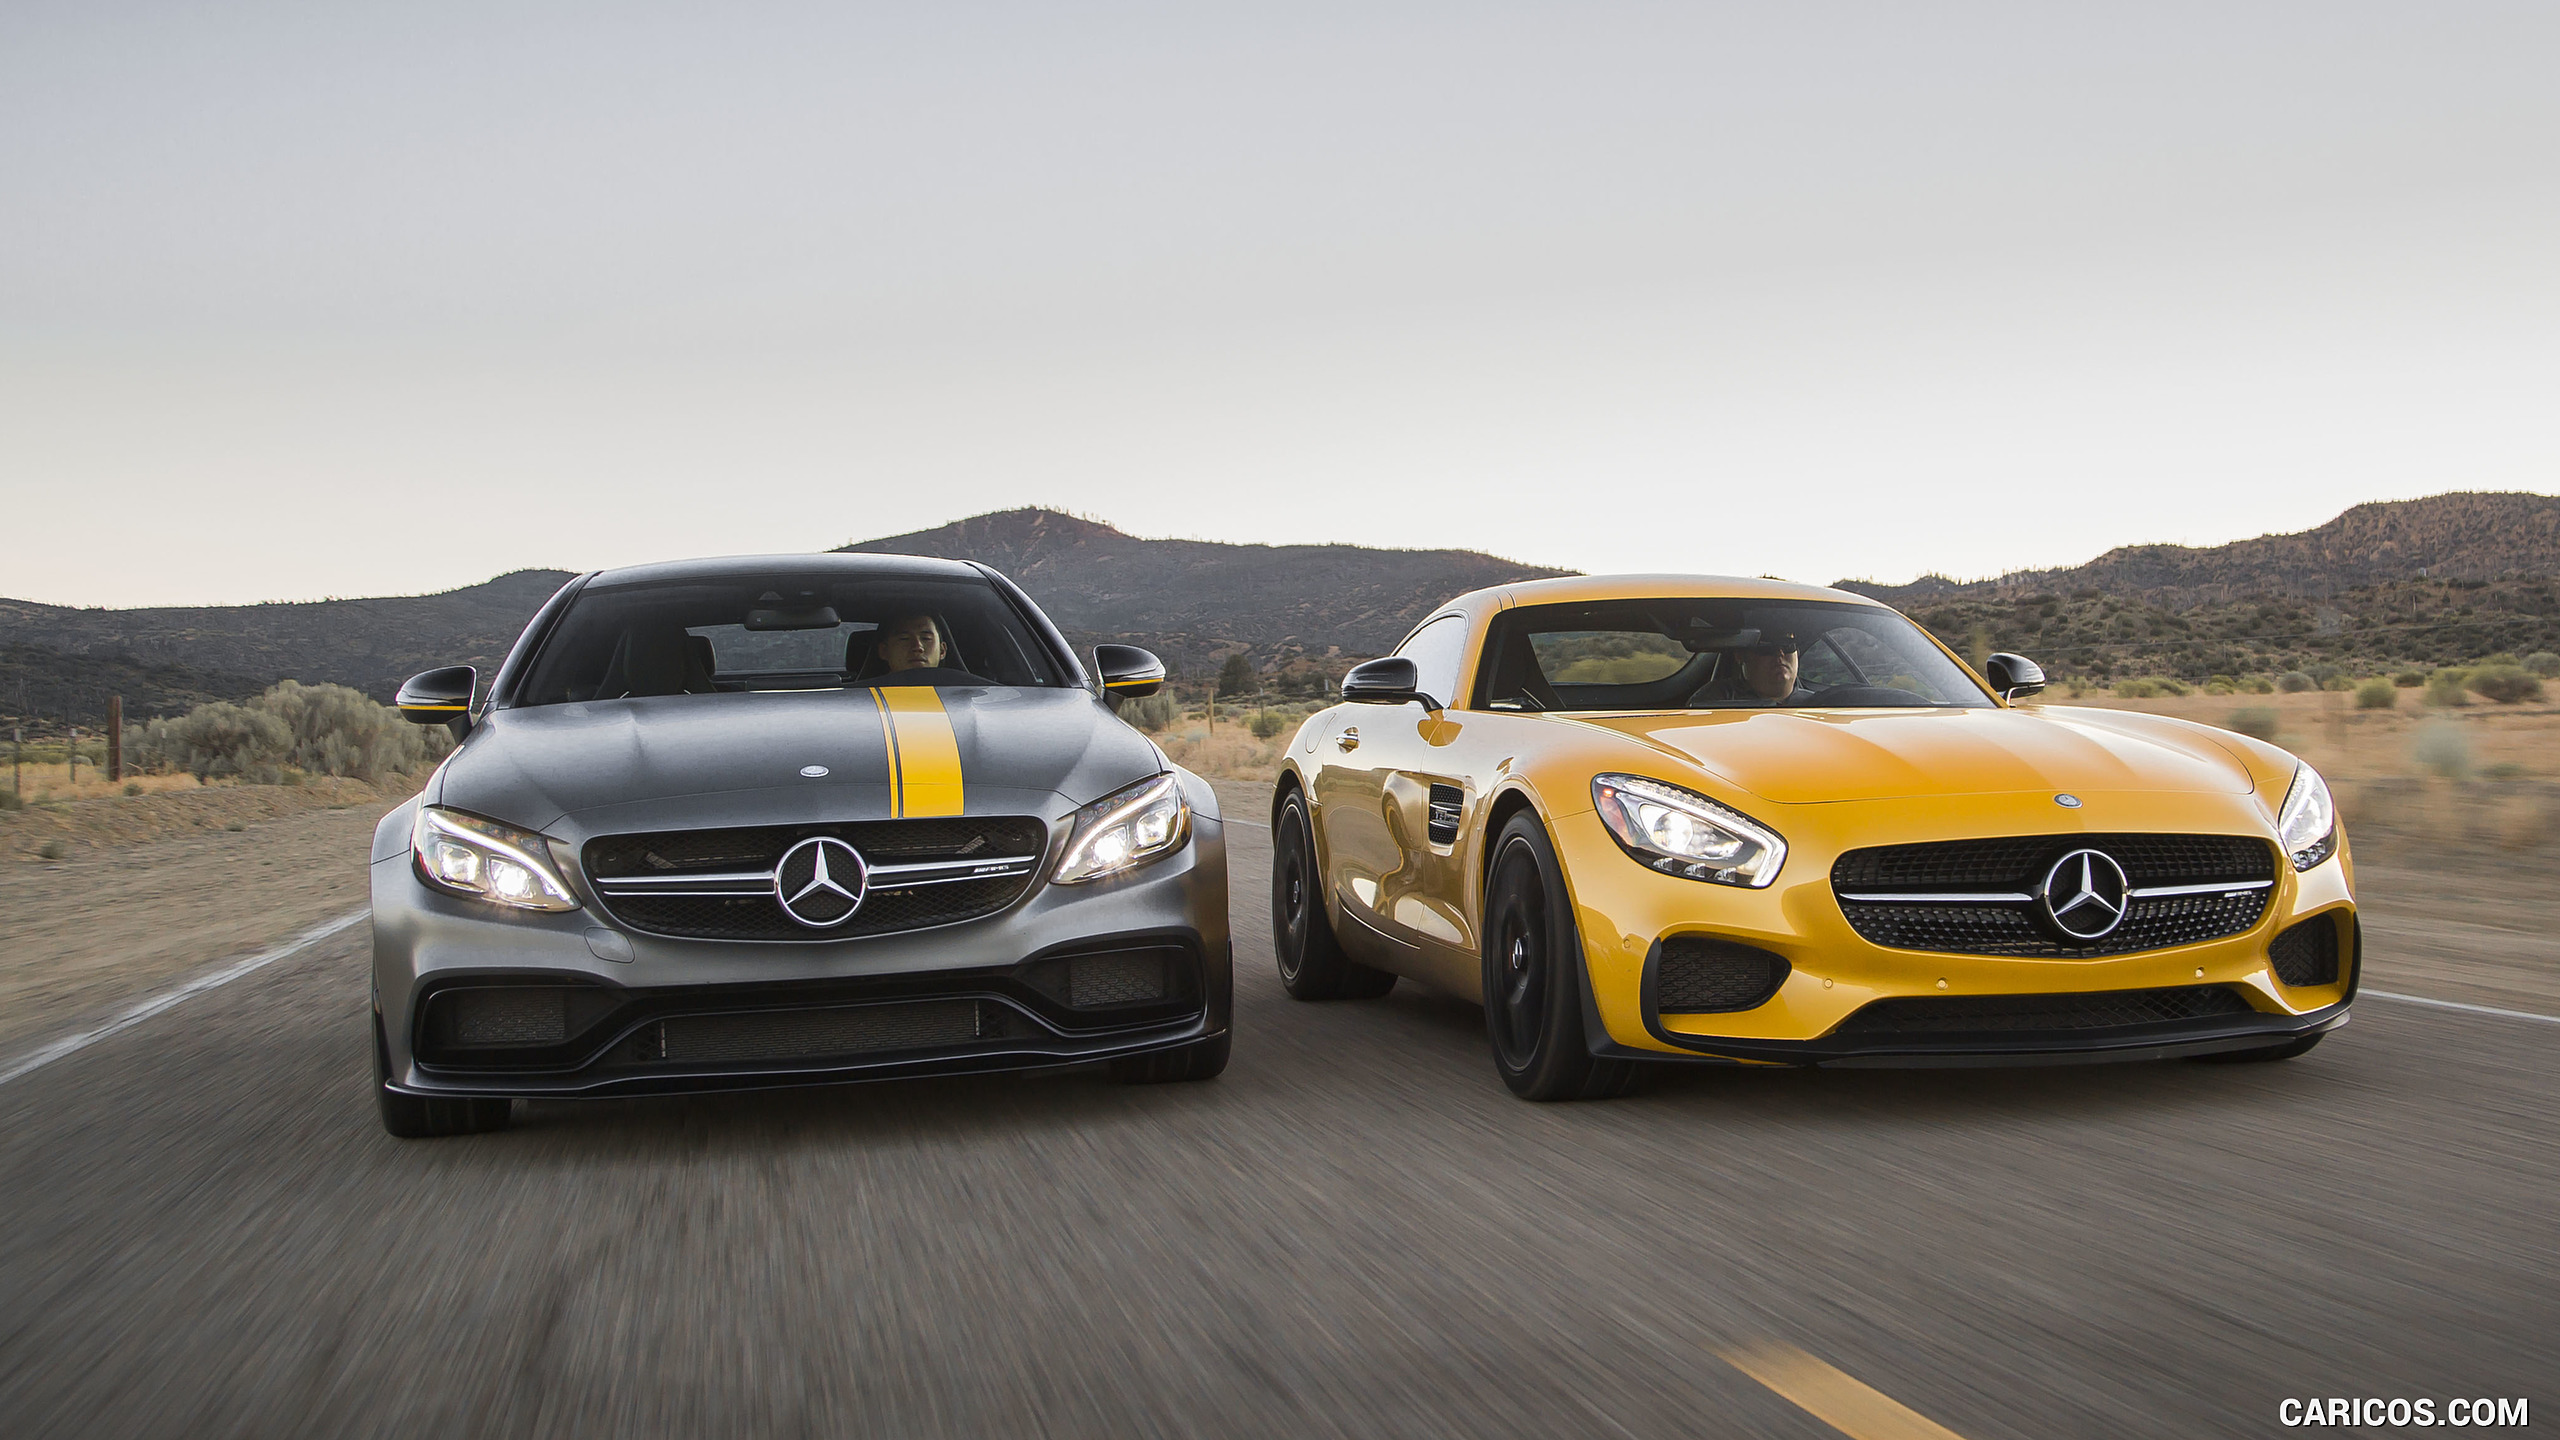 2017 Mercedes-AMG C63 S Coupe Edition One (US-Spec) and 2017 Mercedes-AMG GT S Coupe, #81 of 86